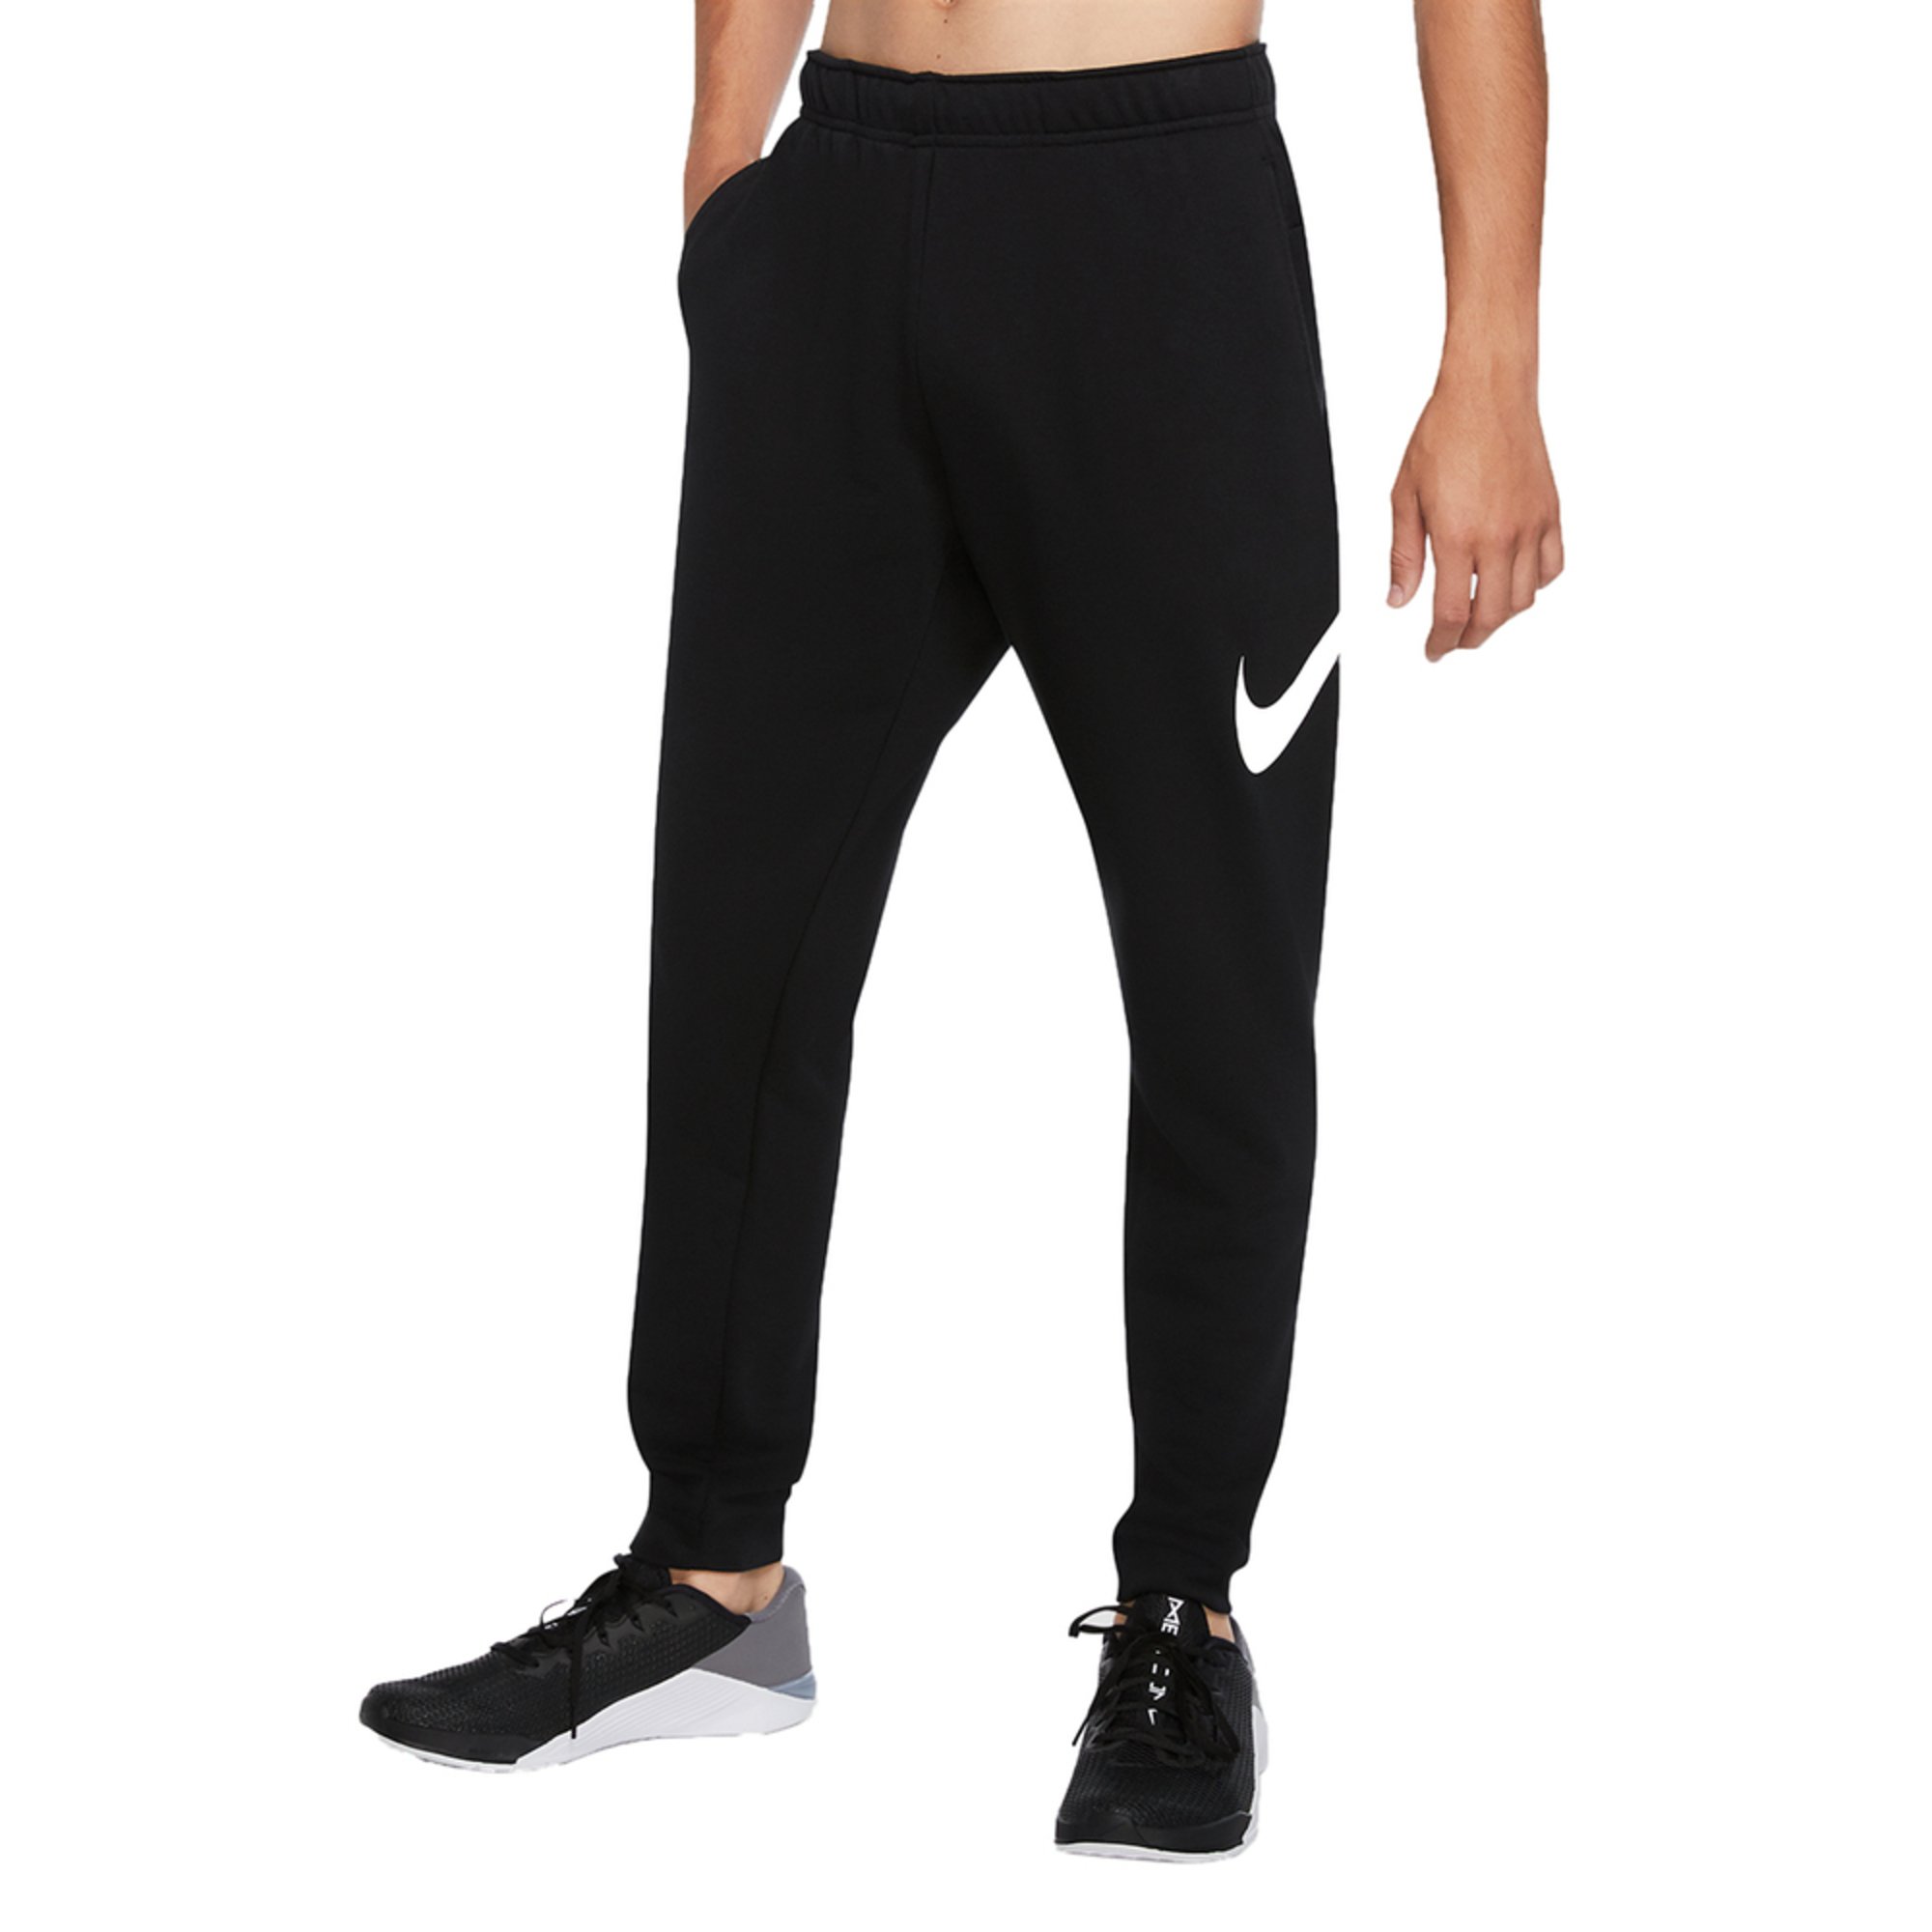 dry tapered pant nike